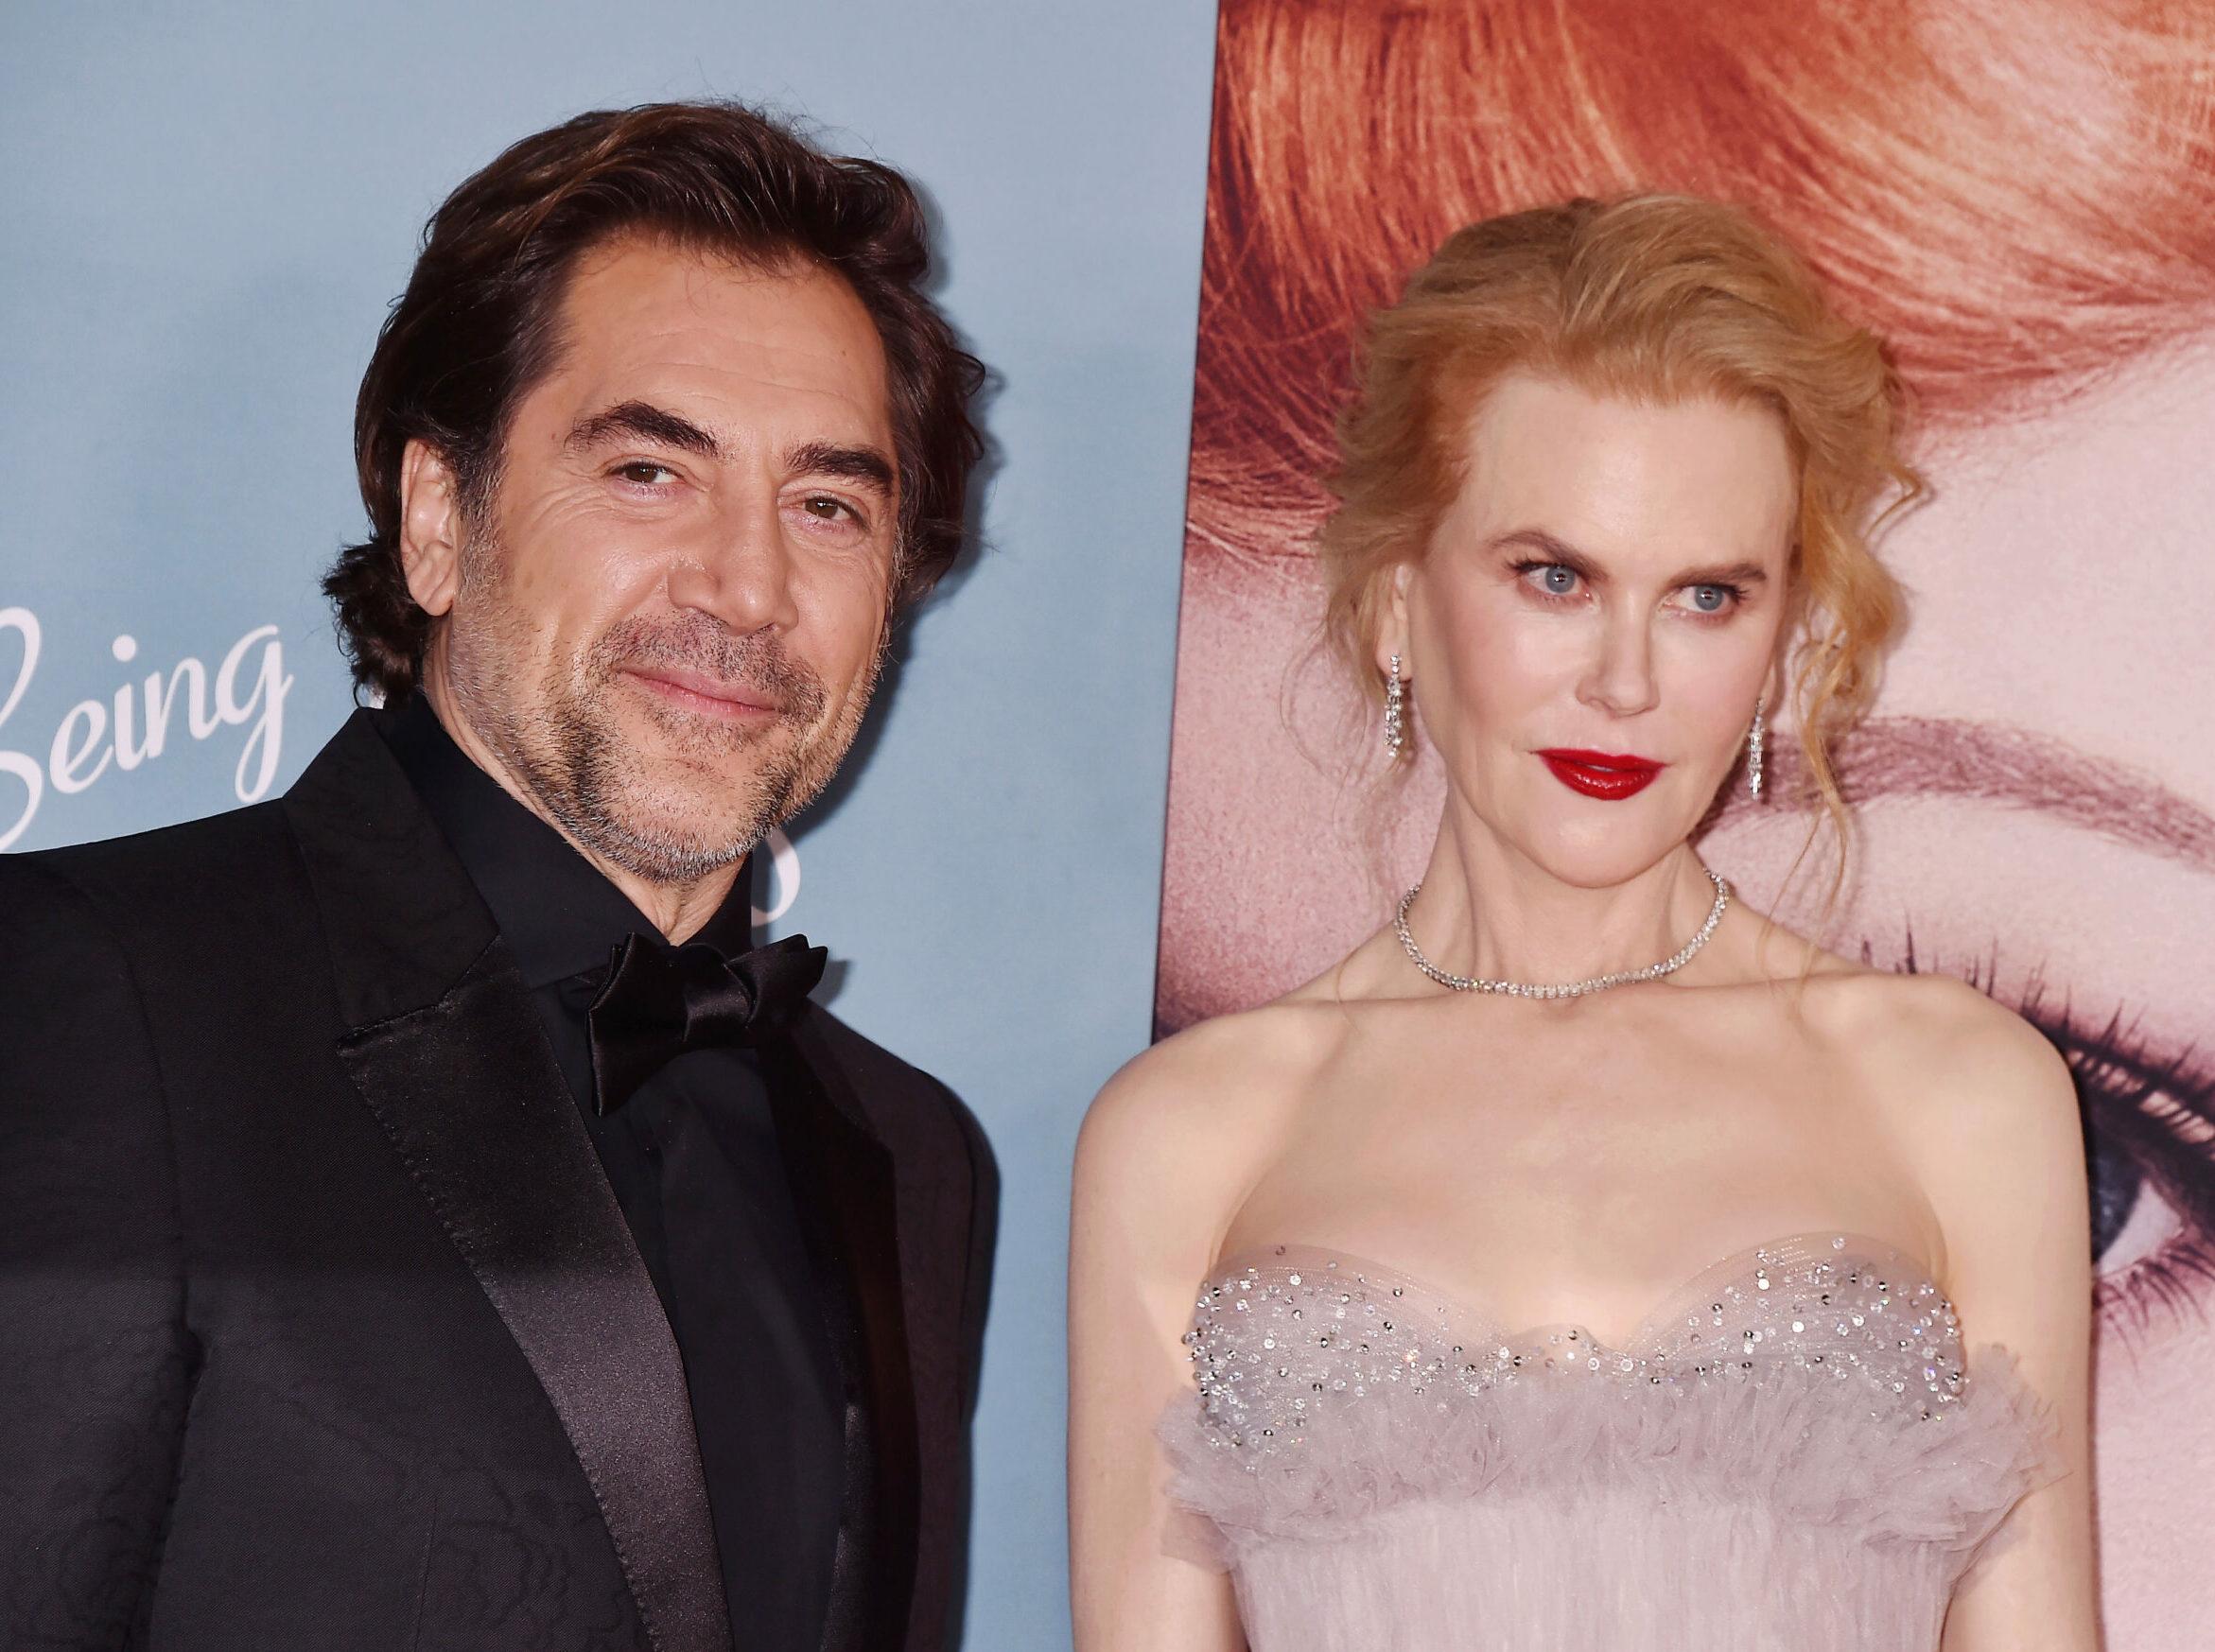 Los Angeles Premiere Of Amazon Studios' "Being The Ricardos" at Academy Museum of Motion Pictures on December 06, 2021 in Los Angeles, California. 06 Dec 2021 Pictured: (L-R) Javier Bardem and Nicole Kidman.